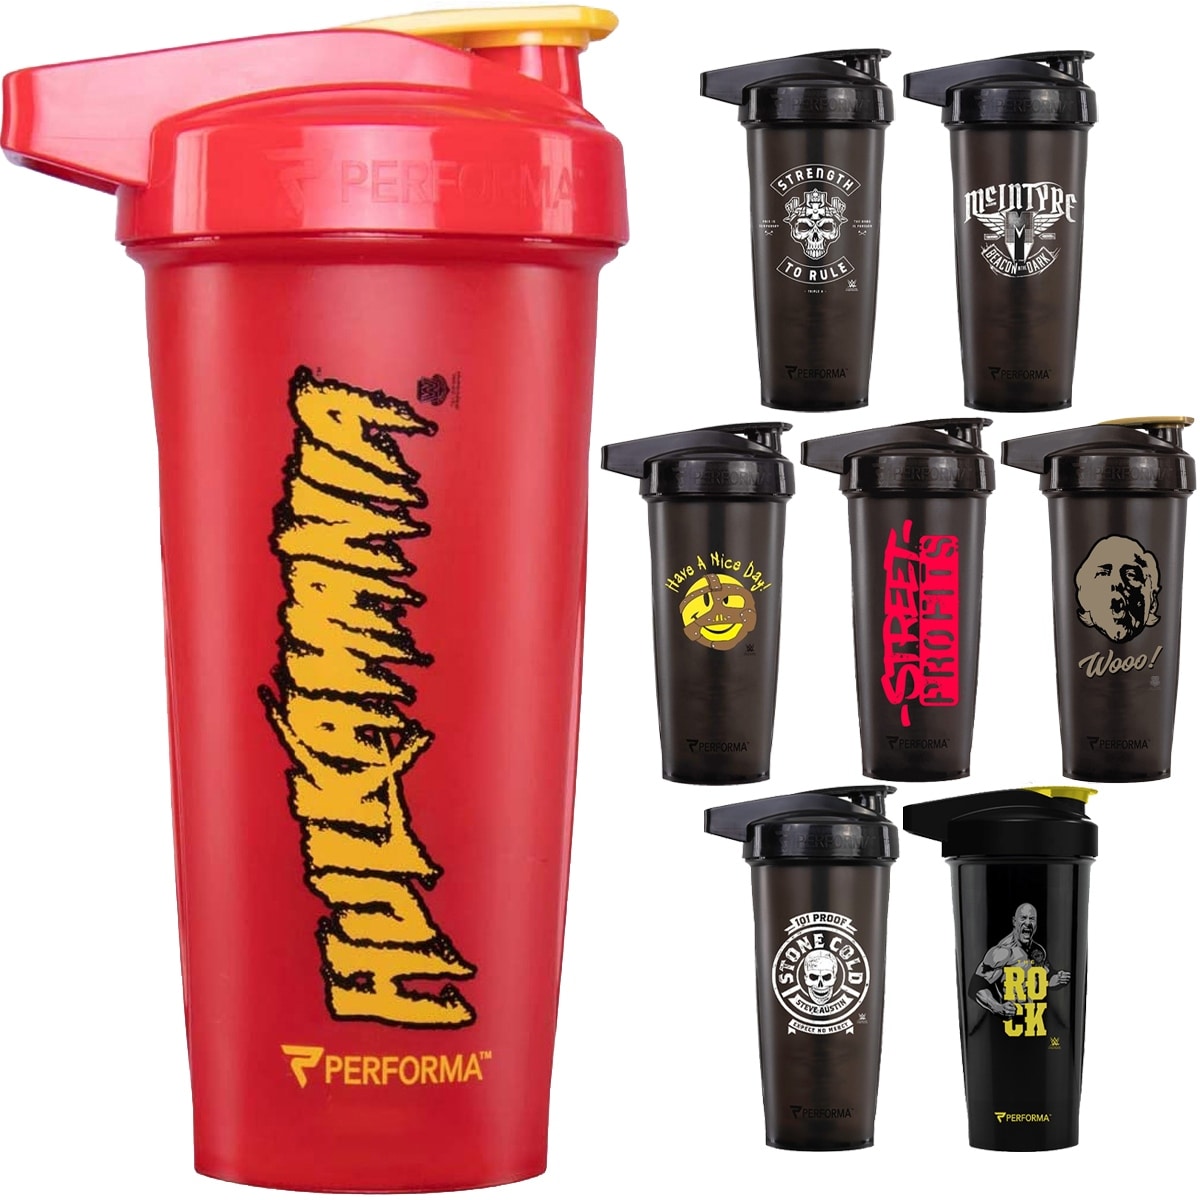 https://ak1.ostkcdn.com/images/products/is/images/direct/c510a27d68cd455b731fcc6141d73b7f07fd1a9f/Performa-Activ-28-oz.-WWE-Collection-Shaker-Cup.jpg